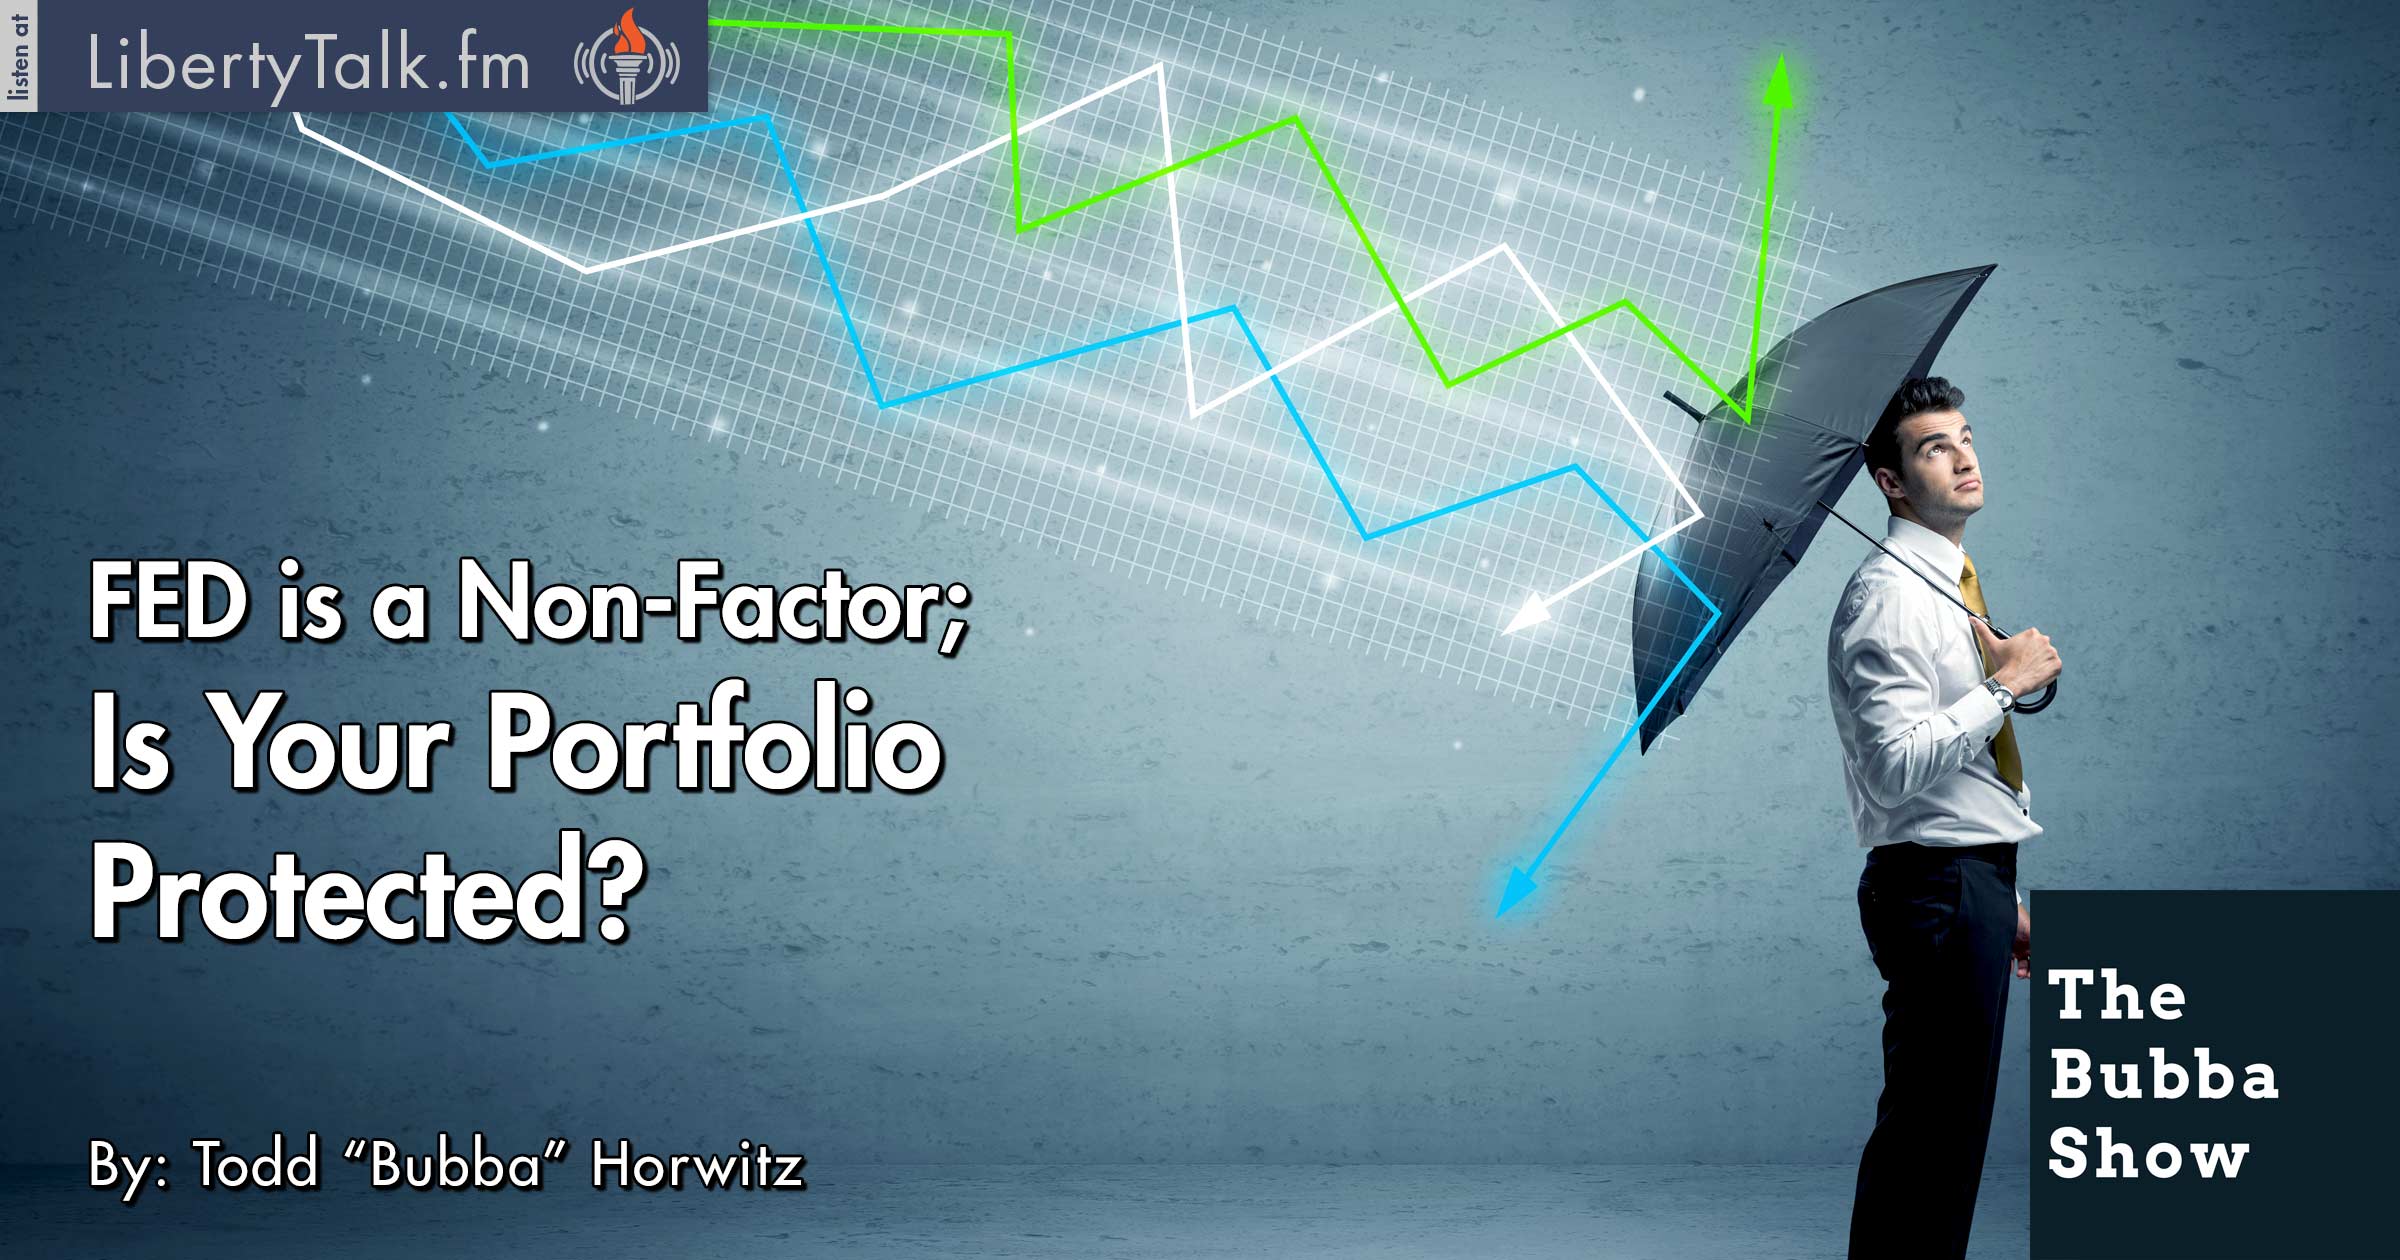 FED is a Non-Factor; Is Your Portfolio Protected? - The Bubba Show